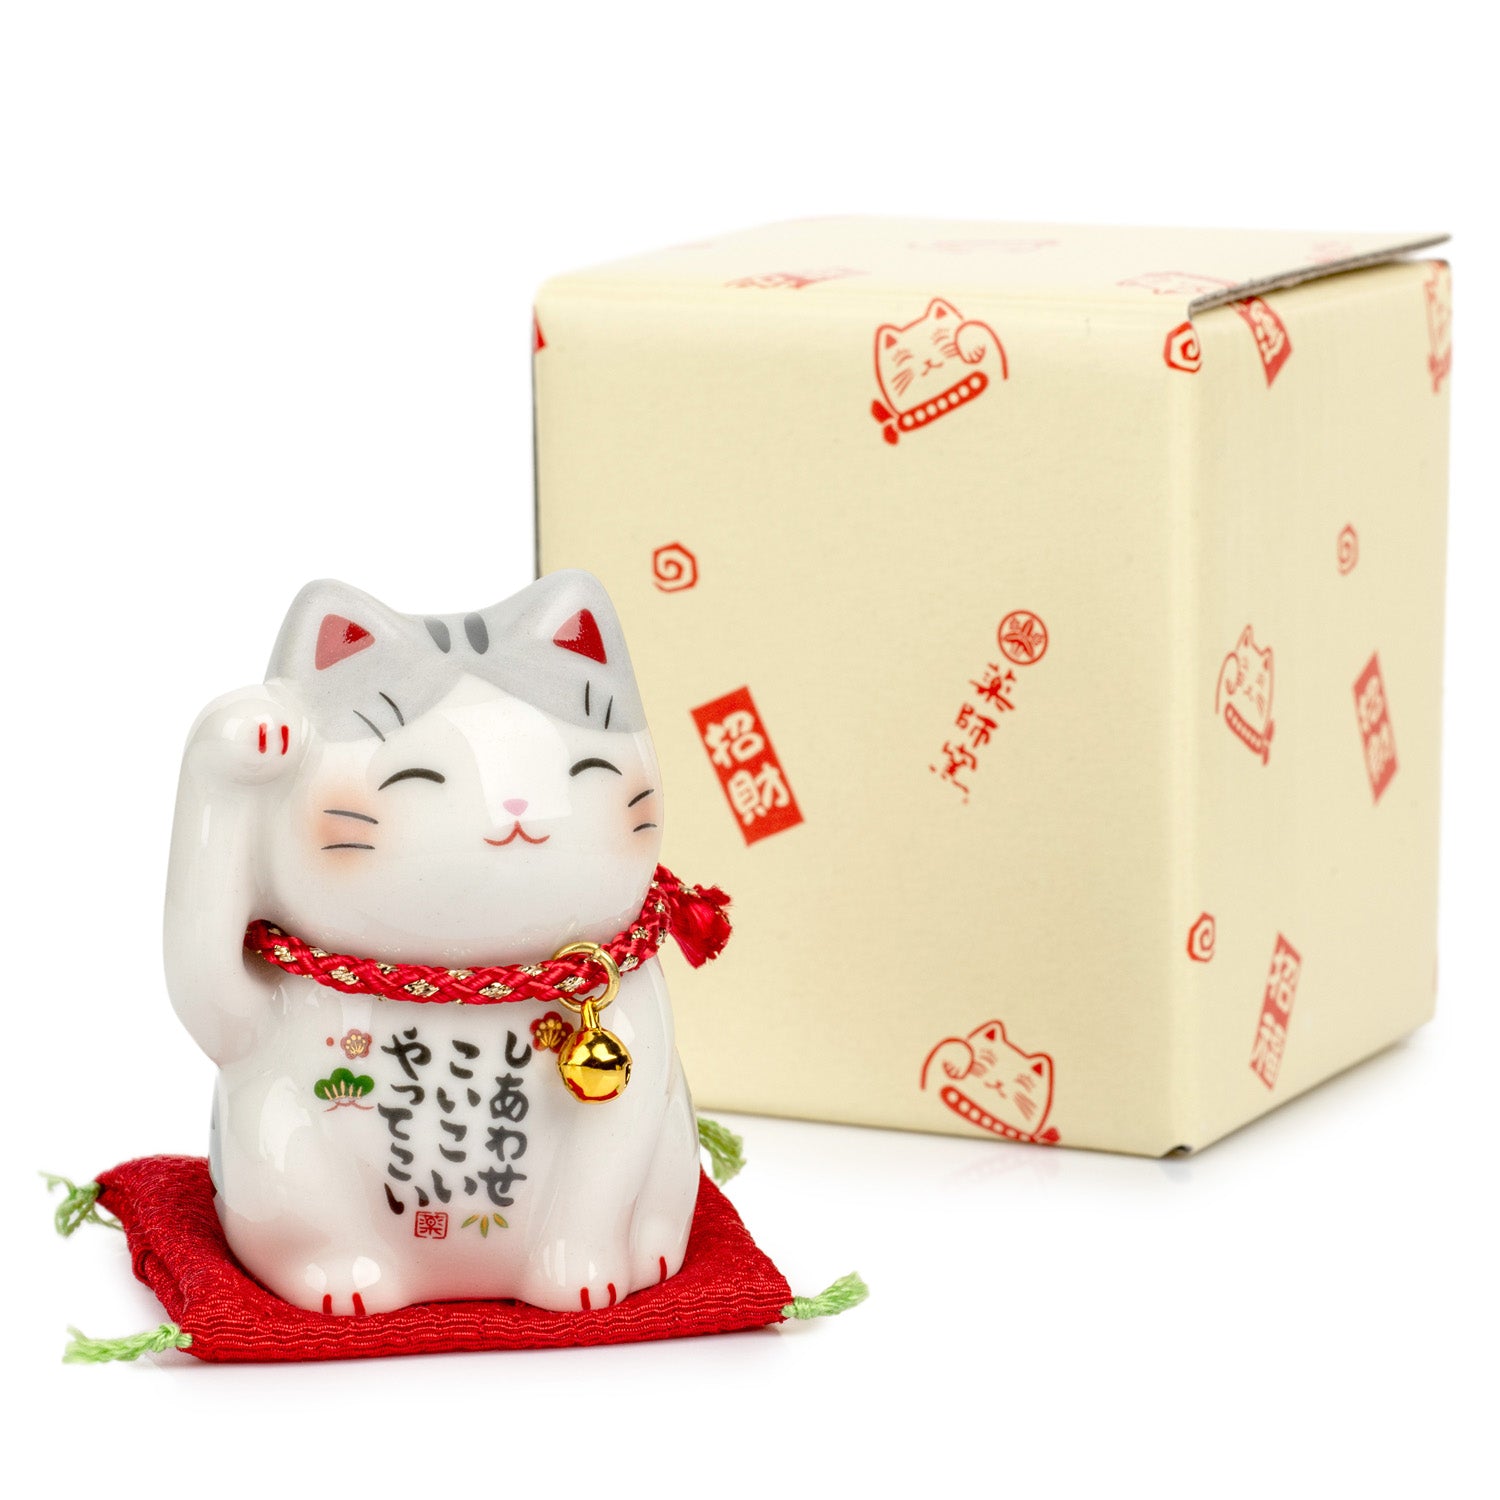 Make a Wish Japanese Lucky Cat and Red Cushion and gift box